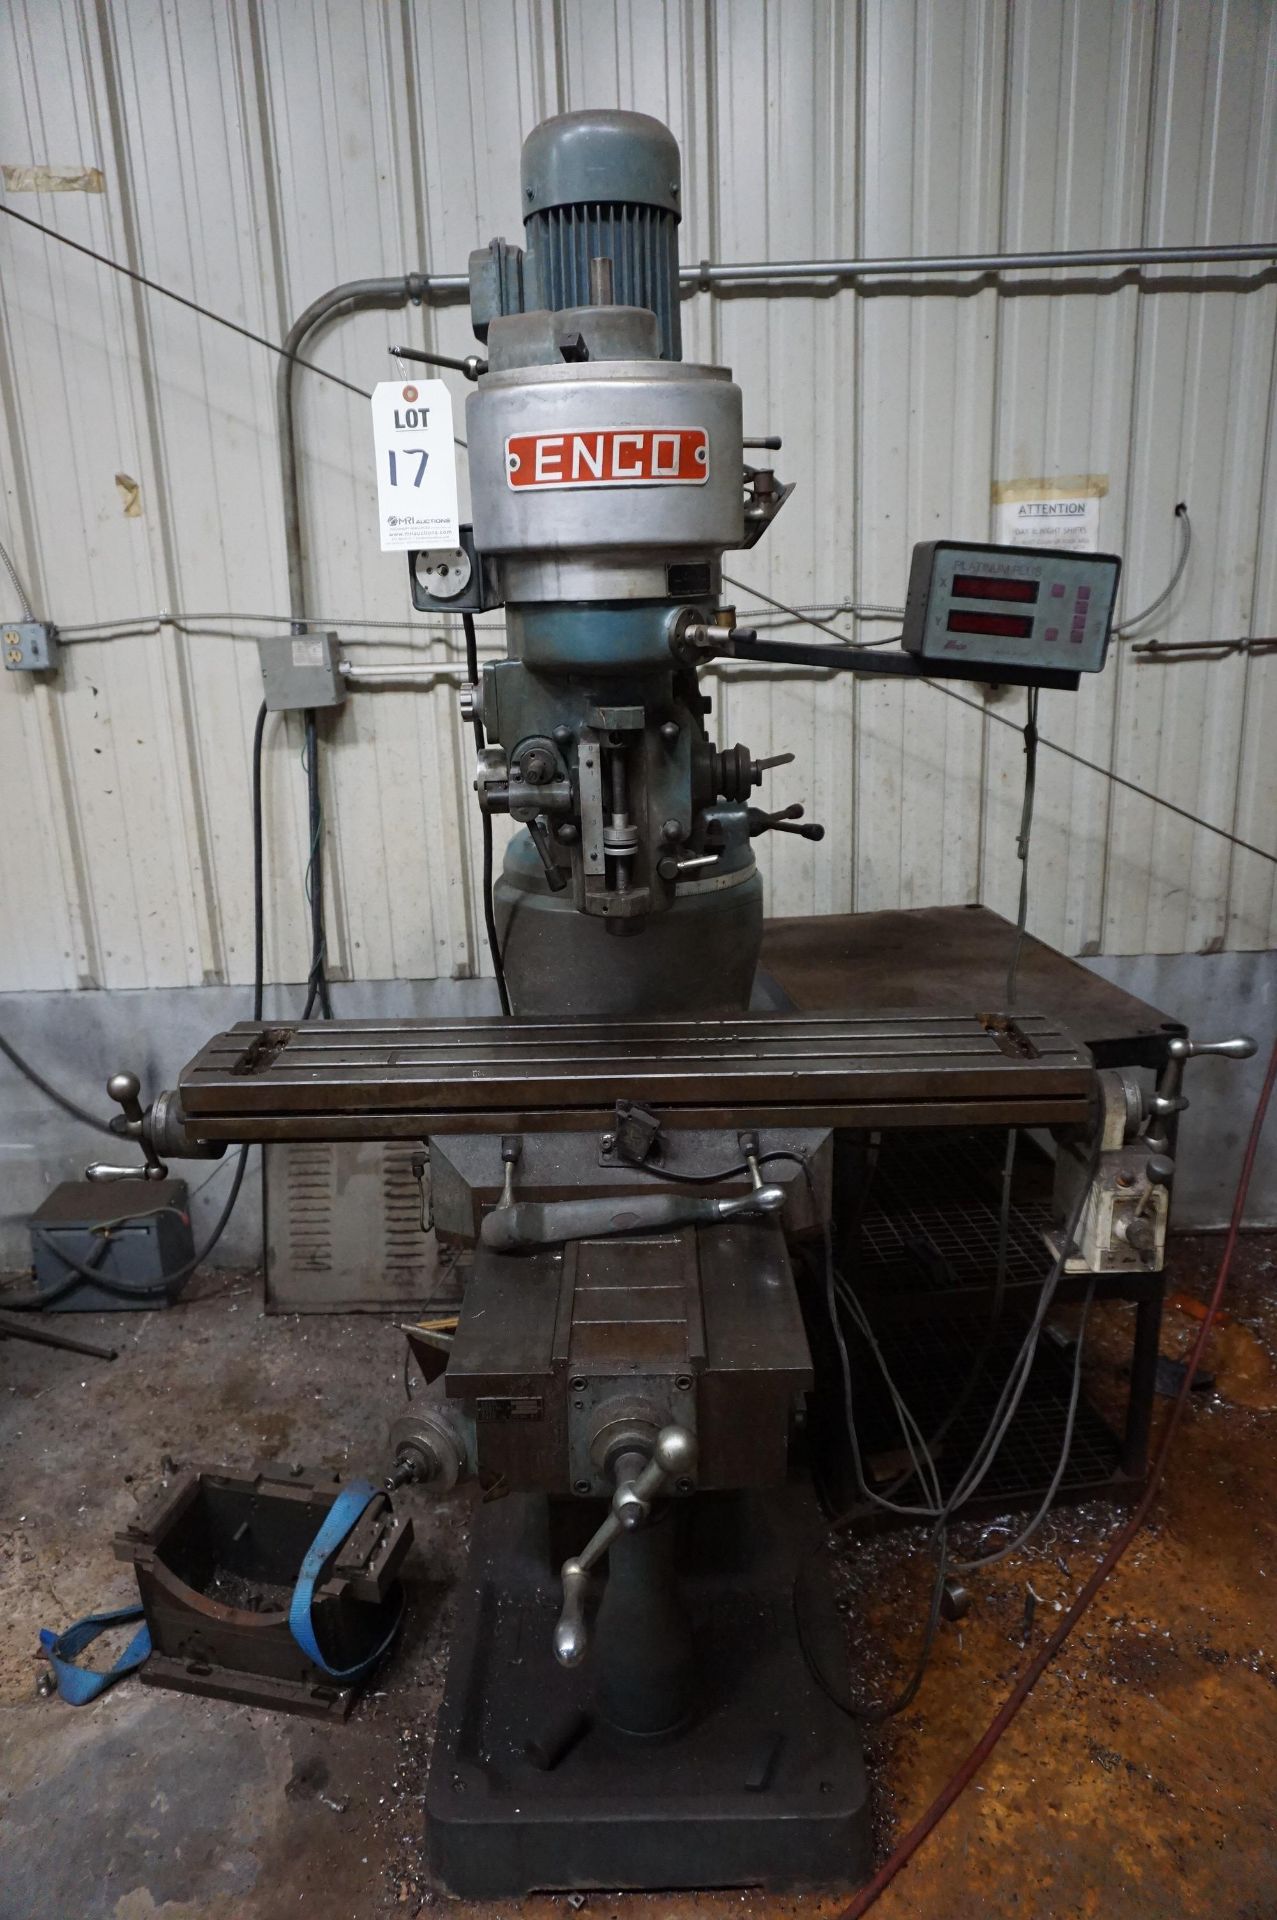 ENCO MANUAL KNEE MILL WITH ENCO DIGITAL READOUT AND MILL TABLE POWER FEED